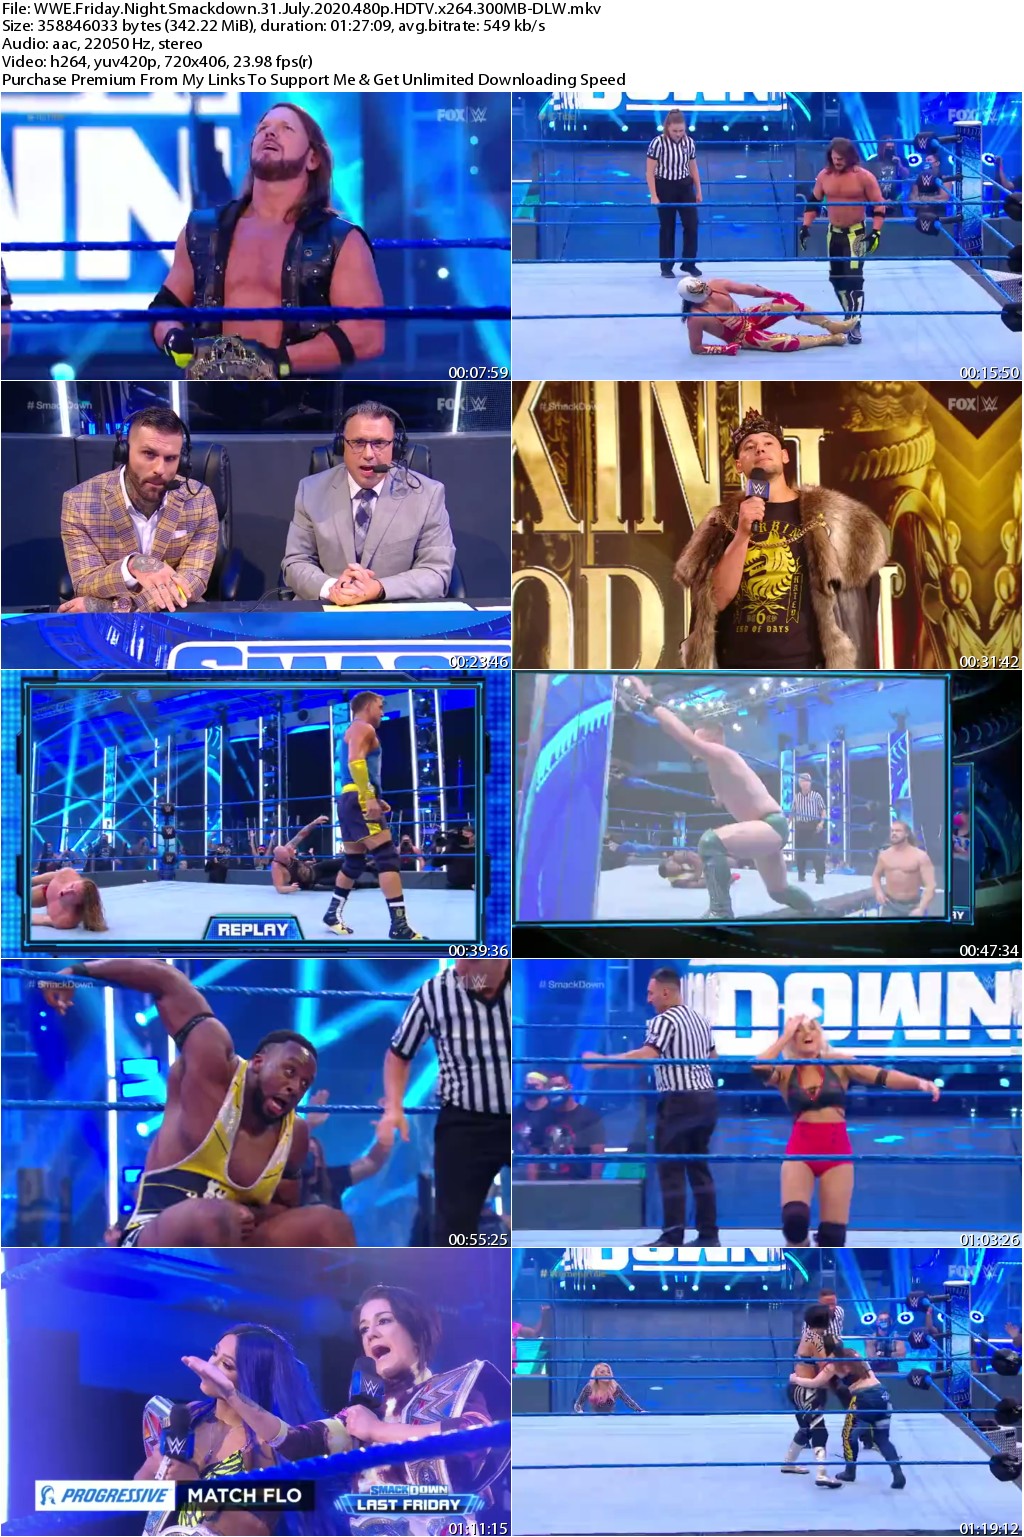 WWE Friday Night Smackdown 31 July 2020 480p HDTV x264 300MB-DLW